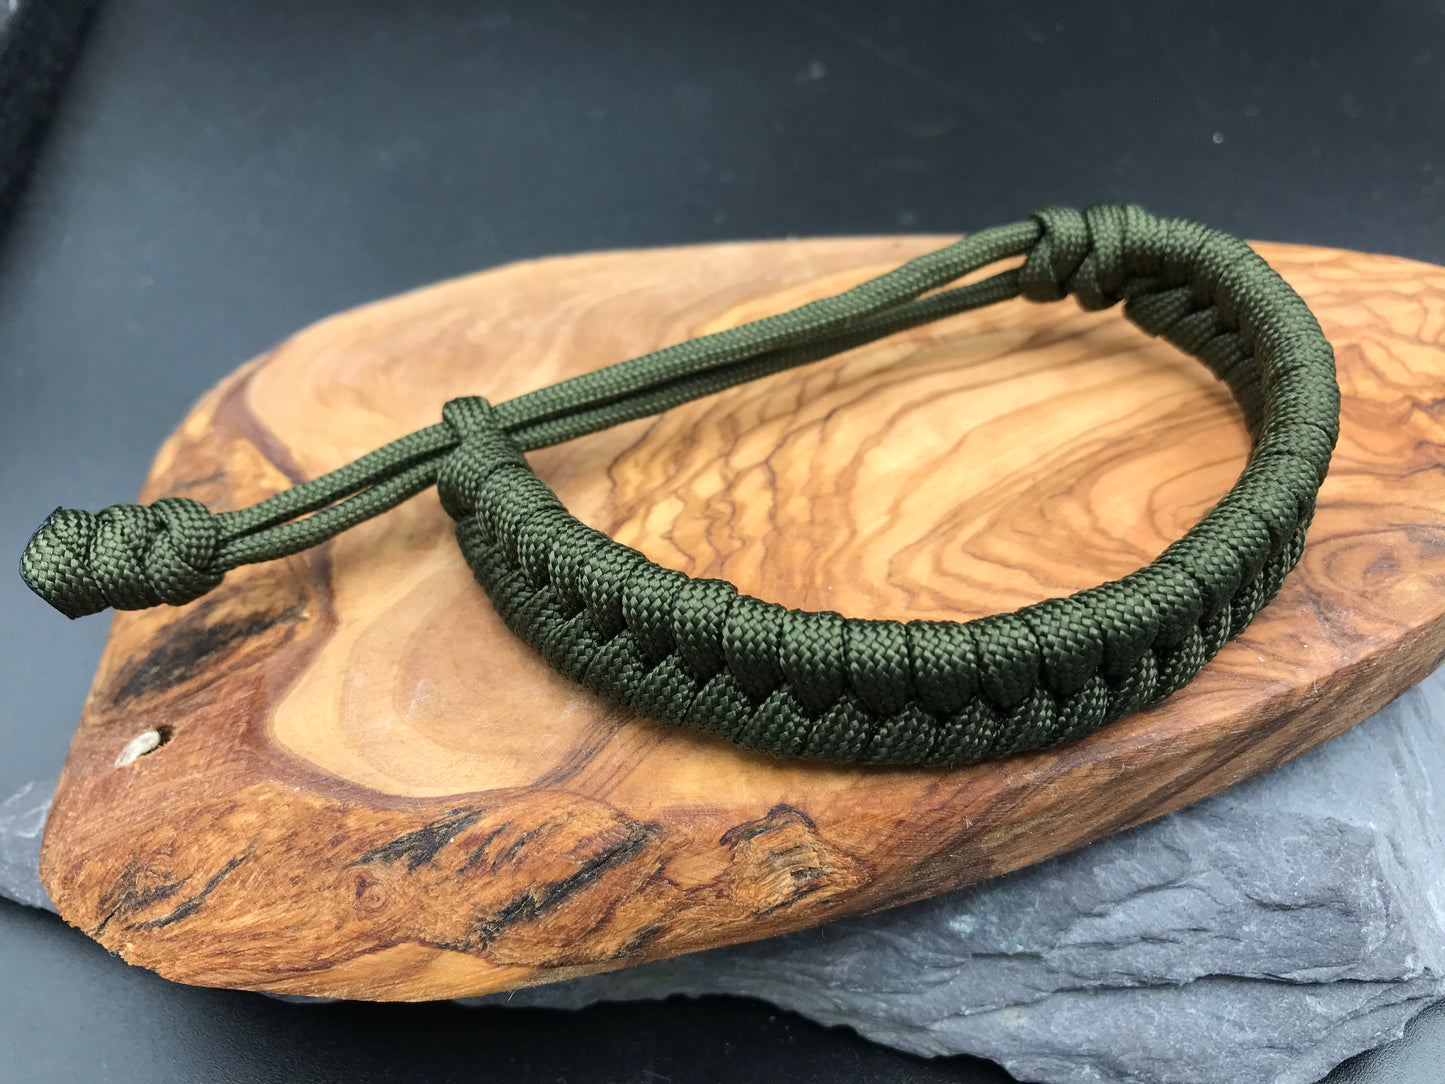 Handmade Paracord Fishtail weave bracelet in Army Olive green colour